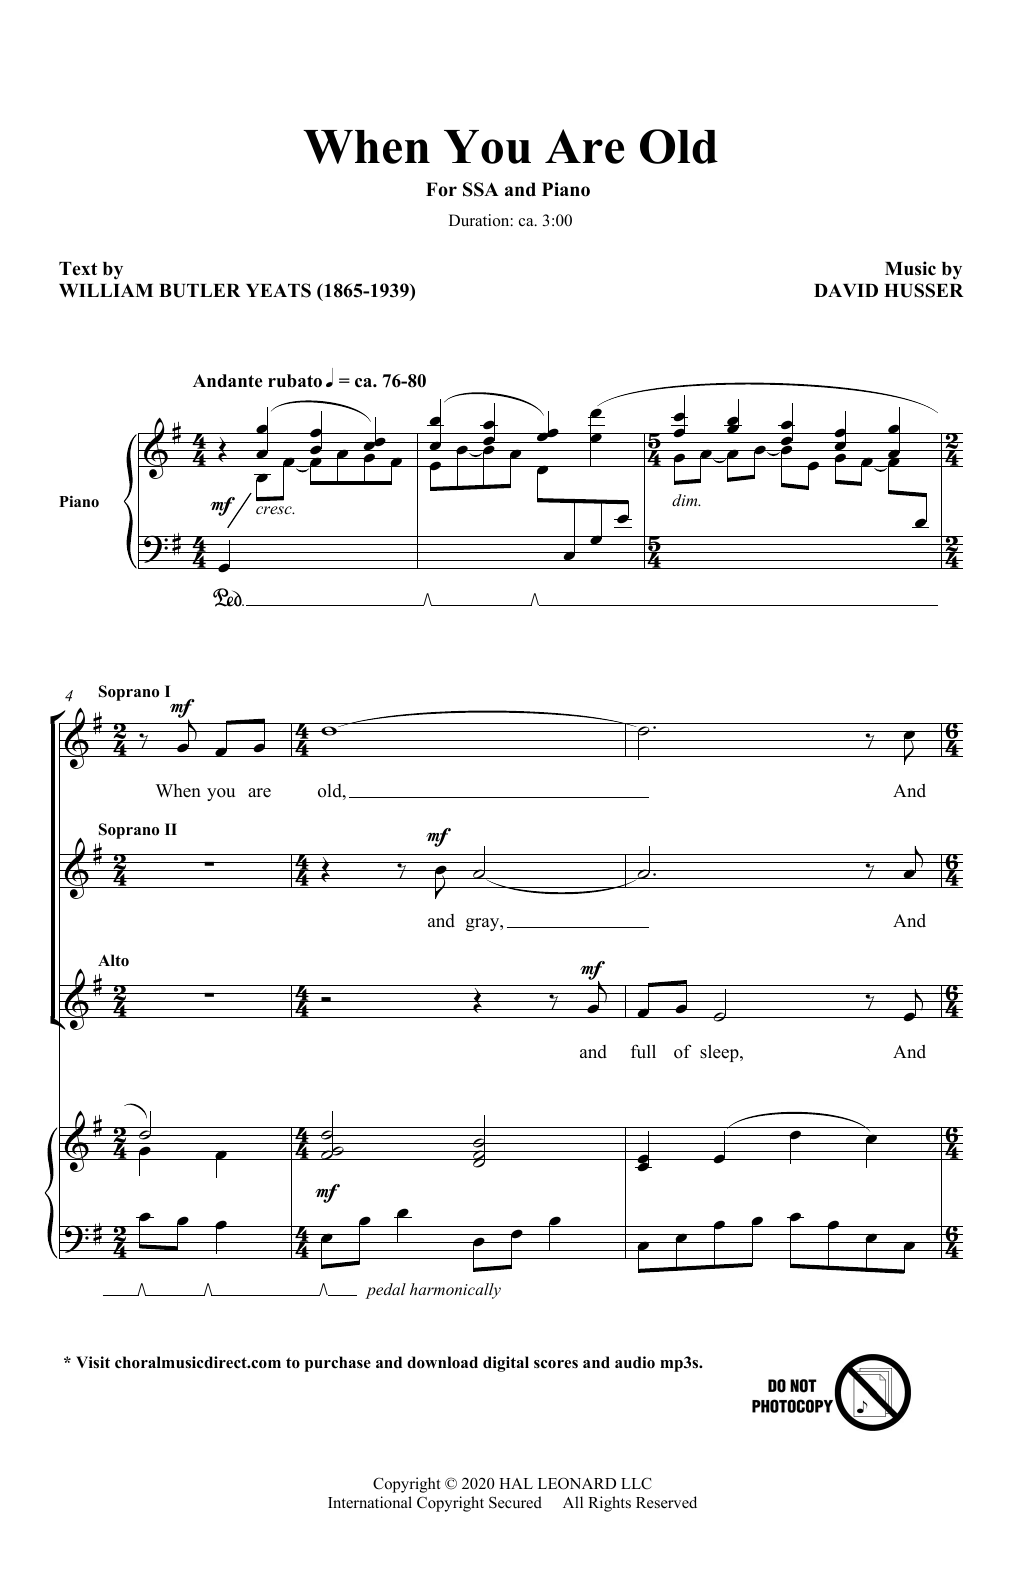 Download William Butler Yeats and David Husse When You Are Old Sheet Music